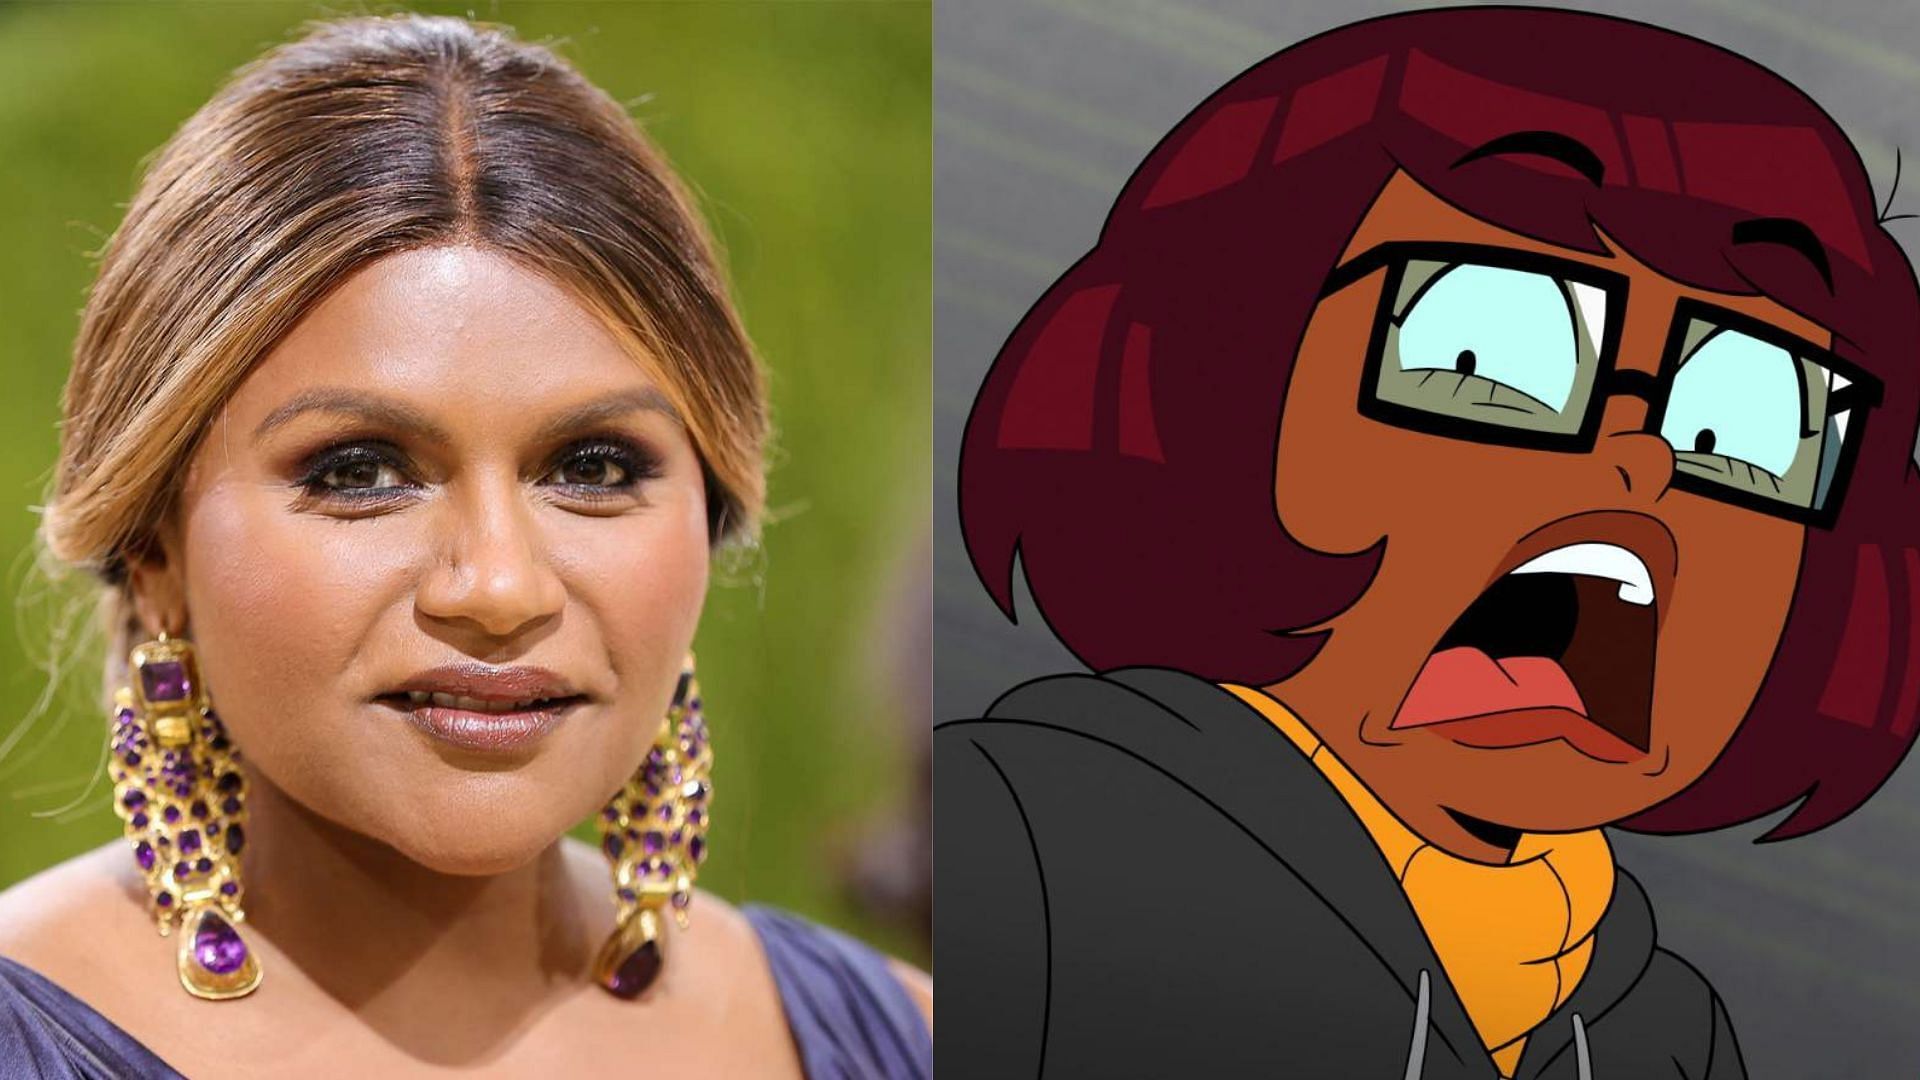 Mindy Kaling criticized for perpetuation of &quot;Indian loser&quot; stereotype (images via Getty/HBO Max)